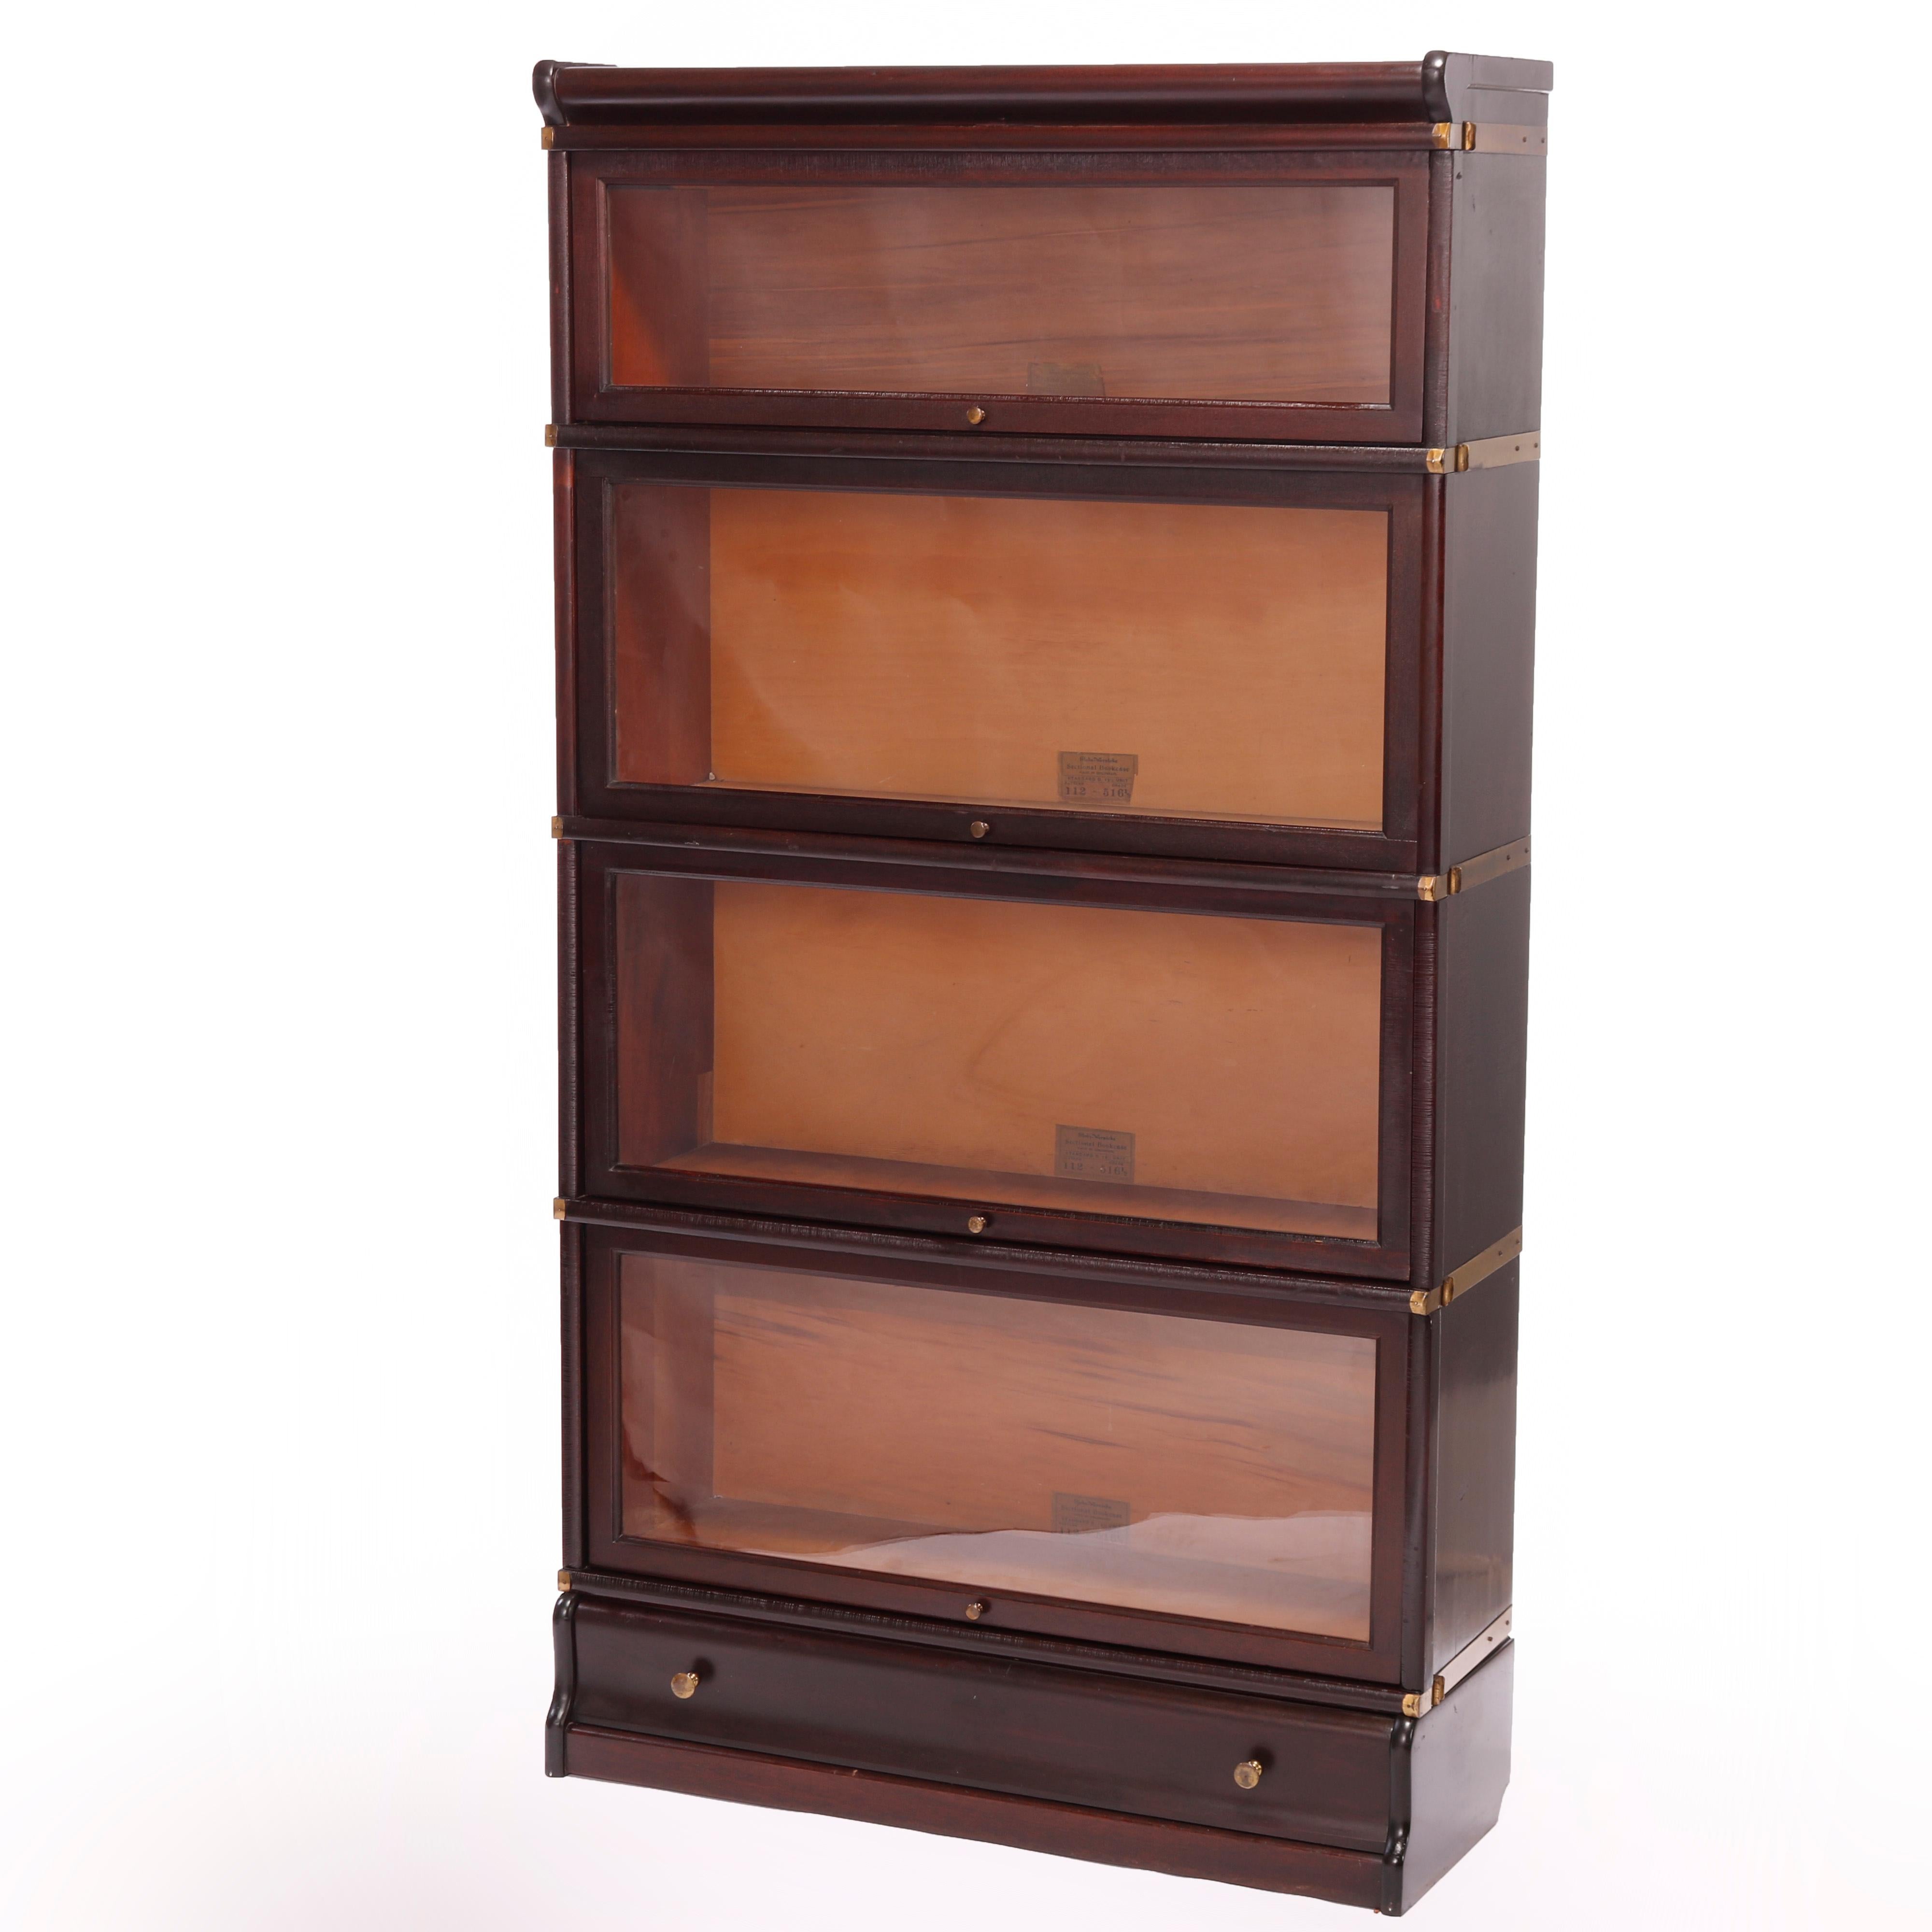 An antique Arts and Crafts Barrister bookcase by Globe Wernicke offers oak construction with four stacks, each having pull out glass doors and seated on ogee base with drawer, maker label as photographed, c1910

Measures - 63.5''H x 34.25''W x